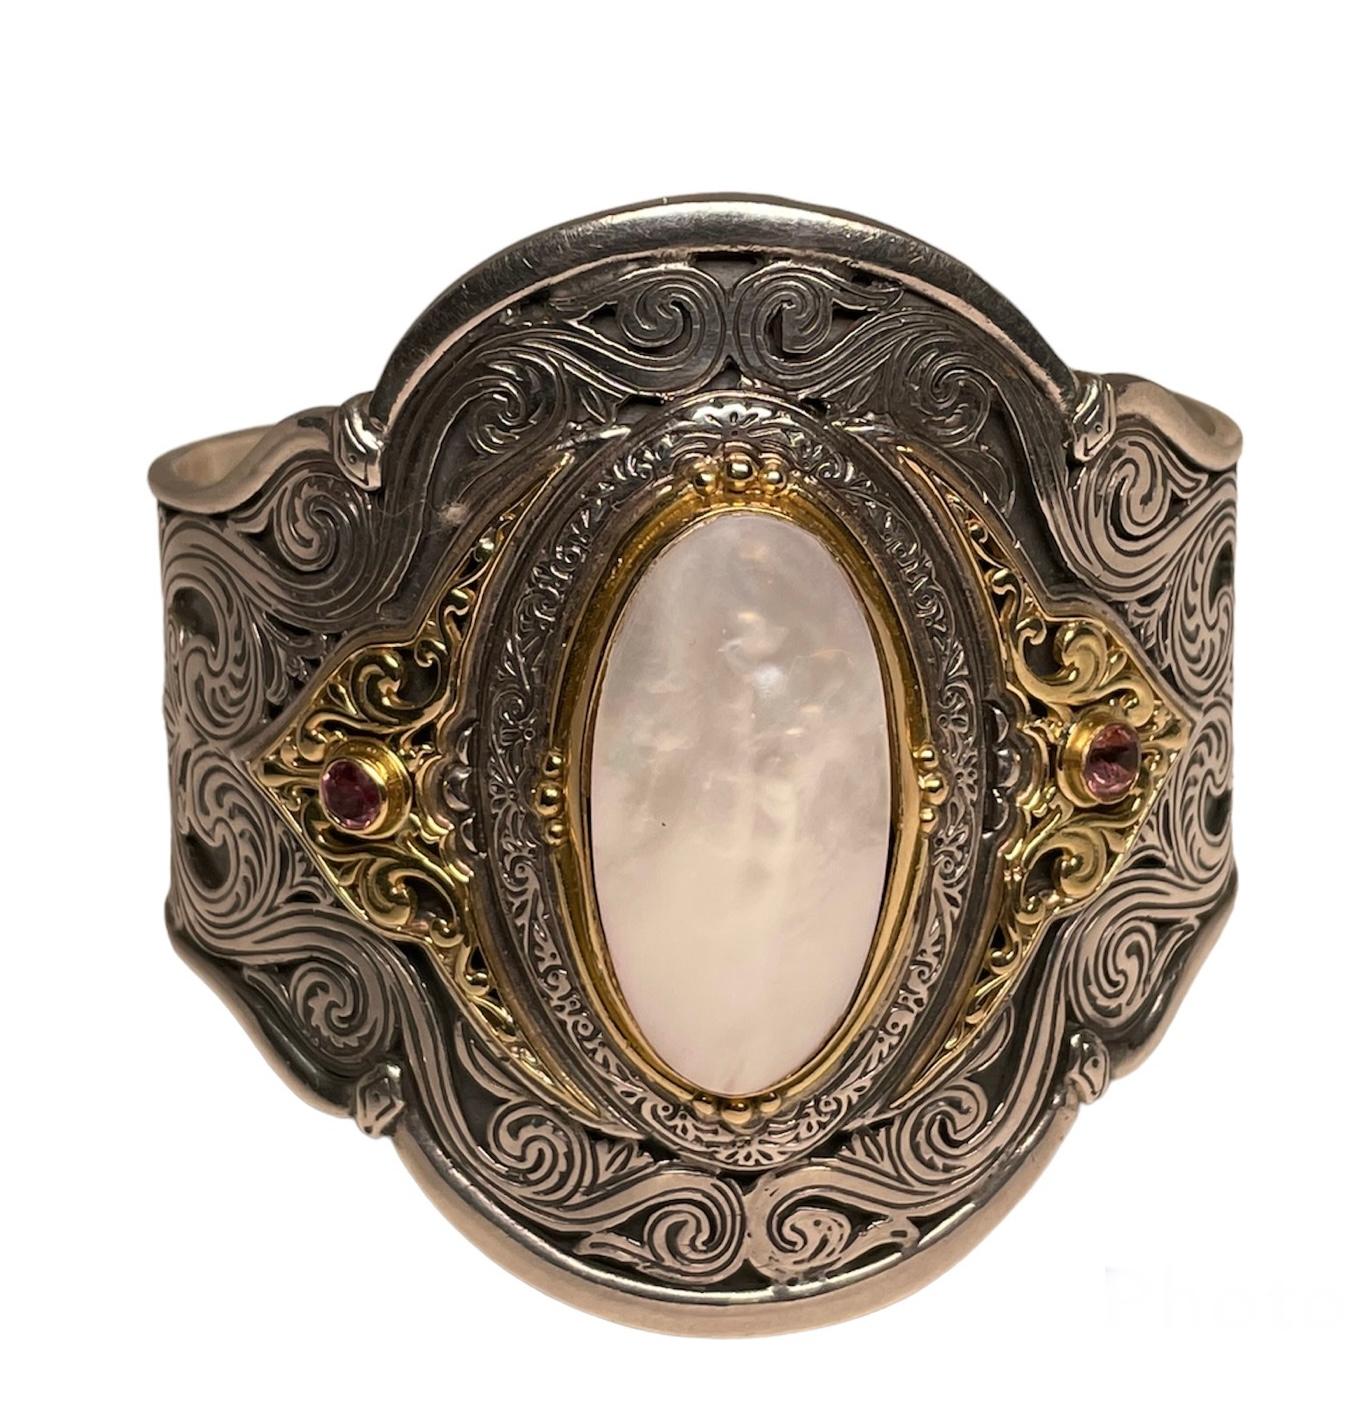 This is a Konstantino 18k yellow gold, sterling silver and mother of pearl cuff bracelet. It is adorned with a large oval cabochon mother of pearl in the center. This one is framed with gold and sterling silver. The sides of the framed oval are